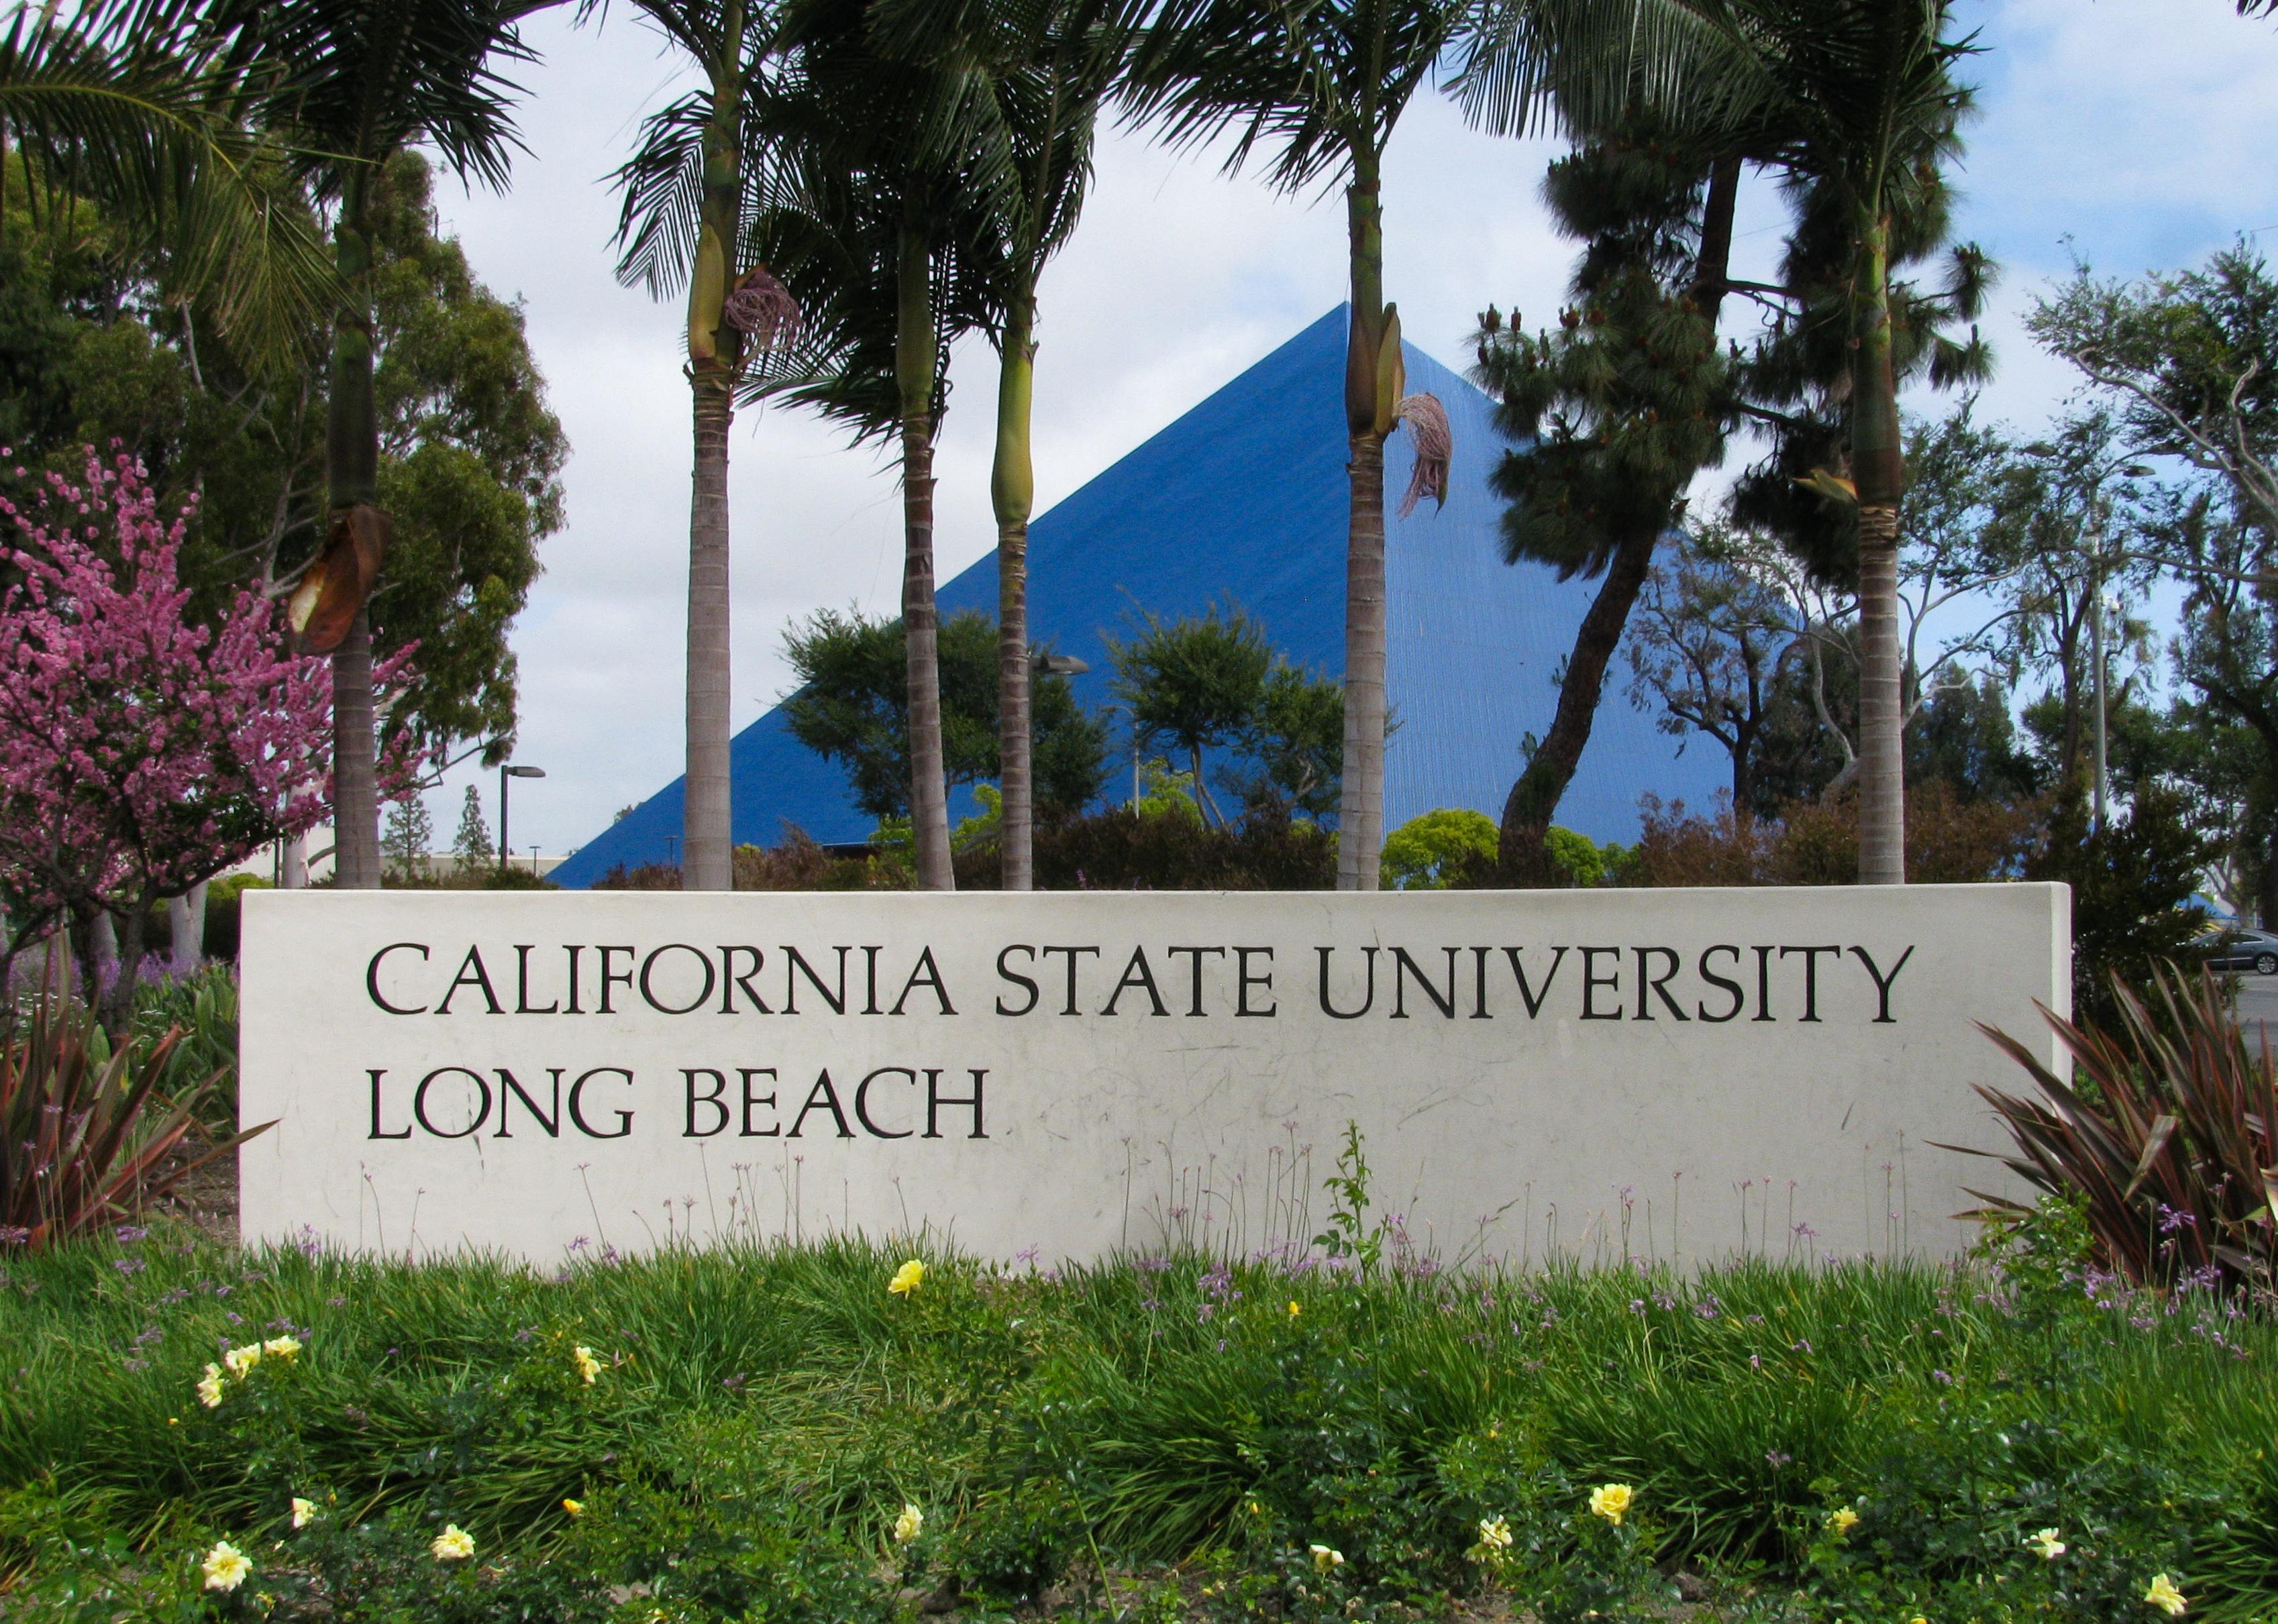 Entrance of California State University Long Beach with sign and a view of Walter Pyramid sports arena.